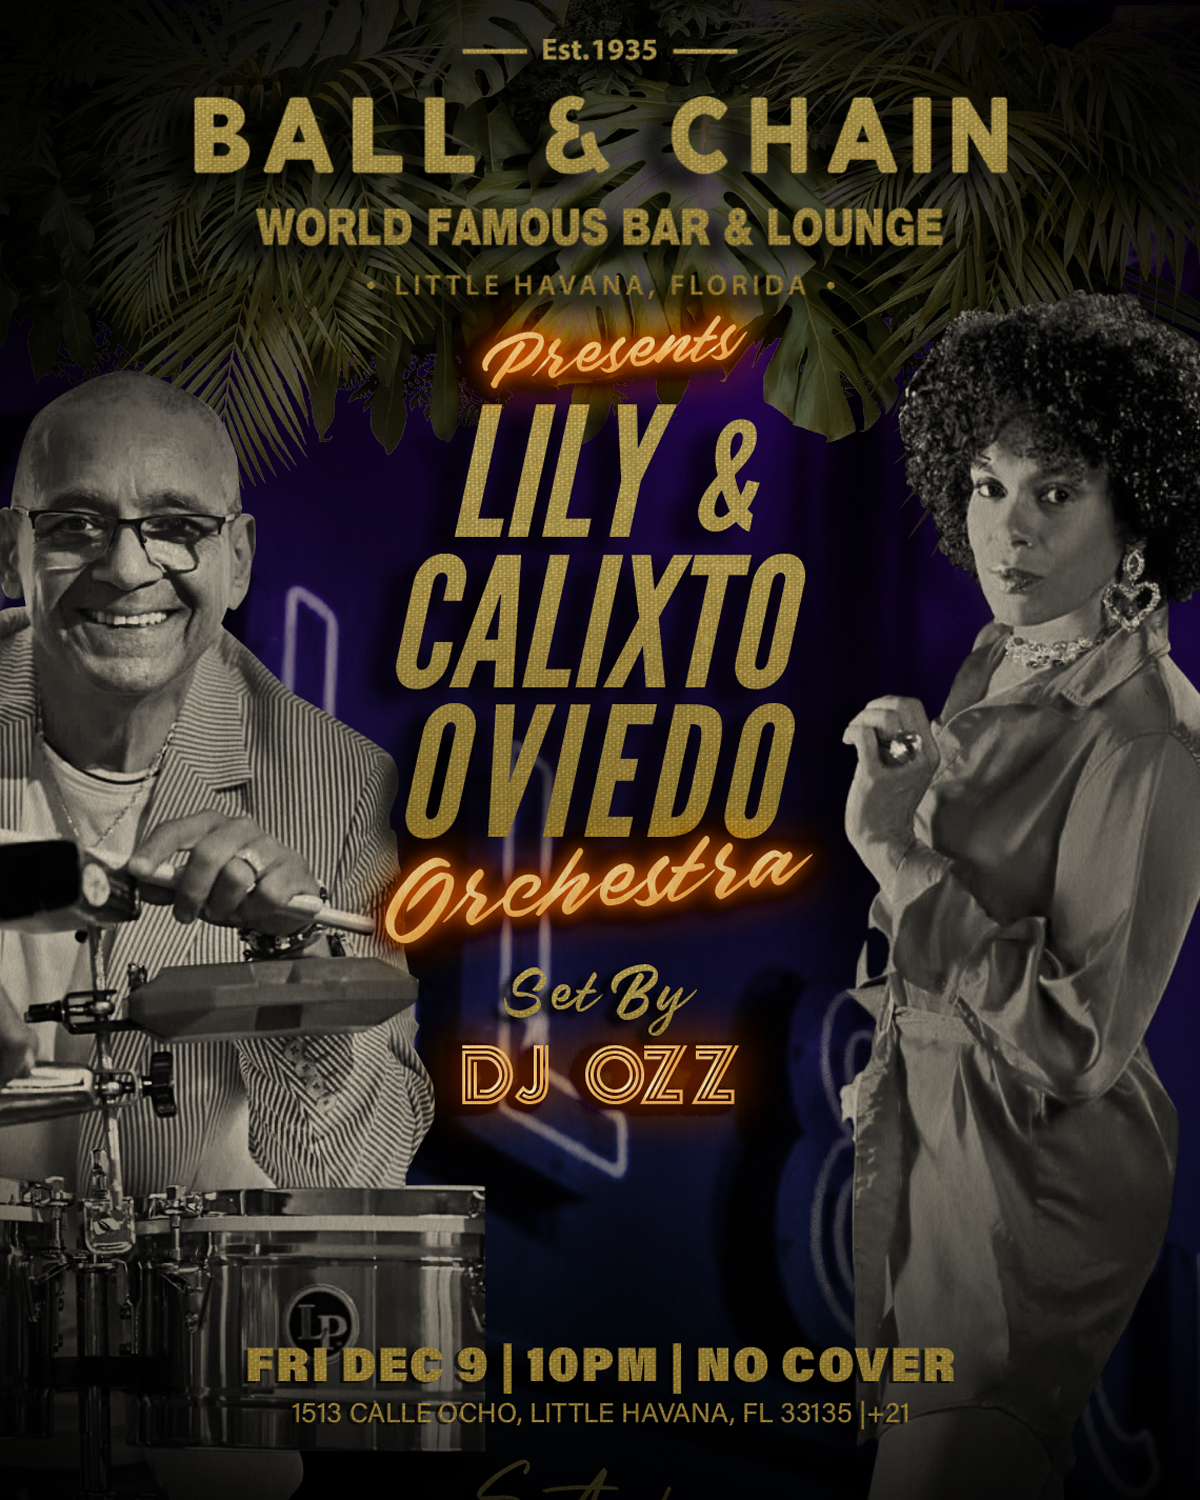 Lily & Calixto Oviedo cutout over a purple background on an event flyer